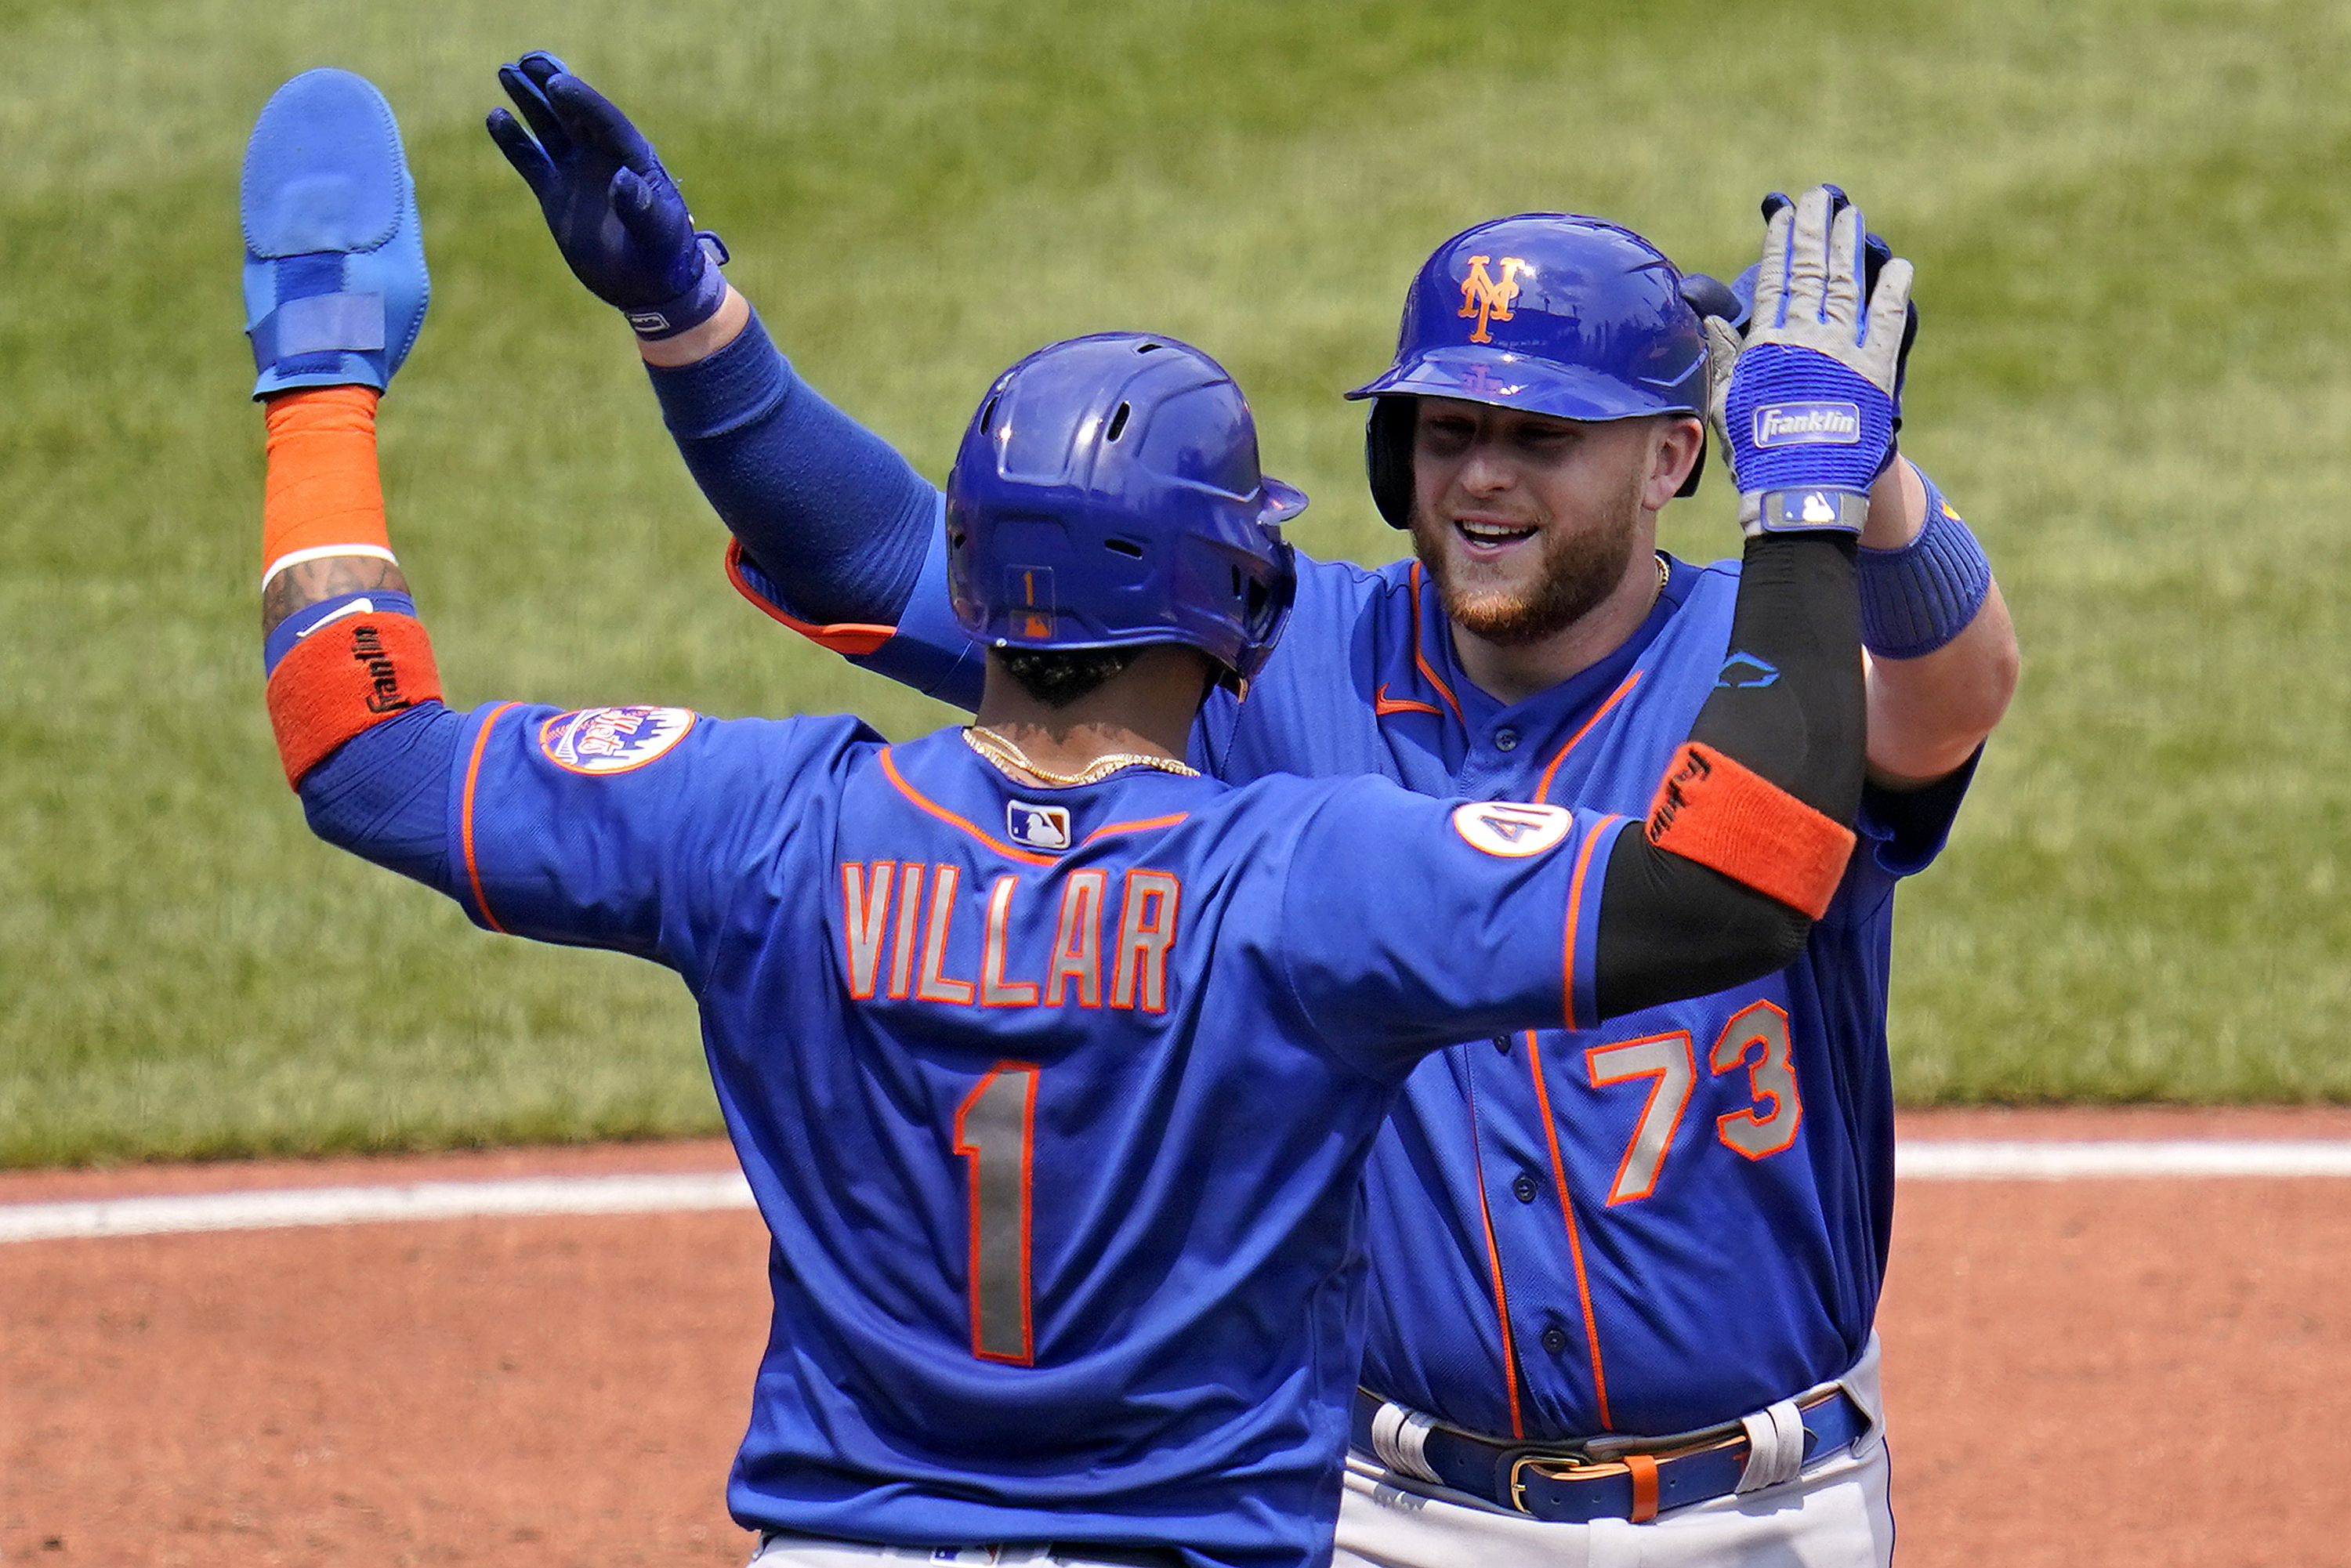 Michael Conforto helps deliver win in possible final Mets home game